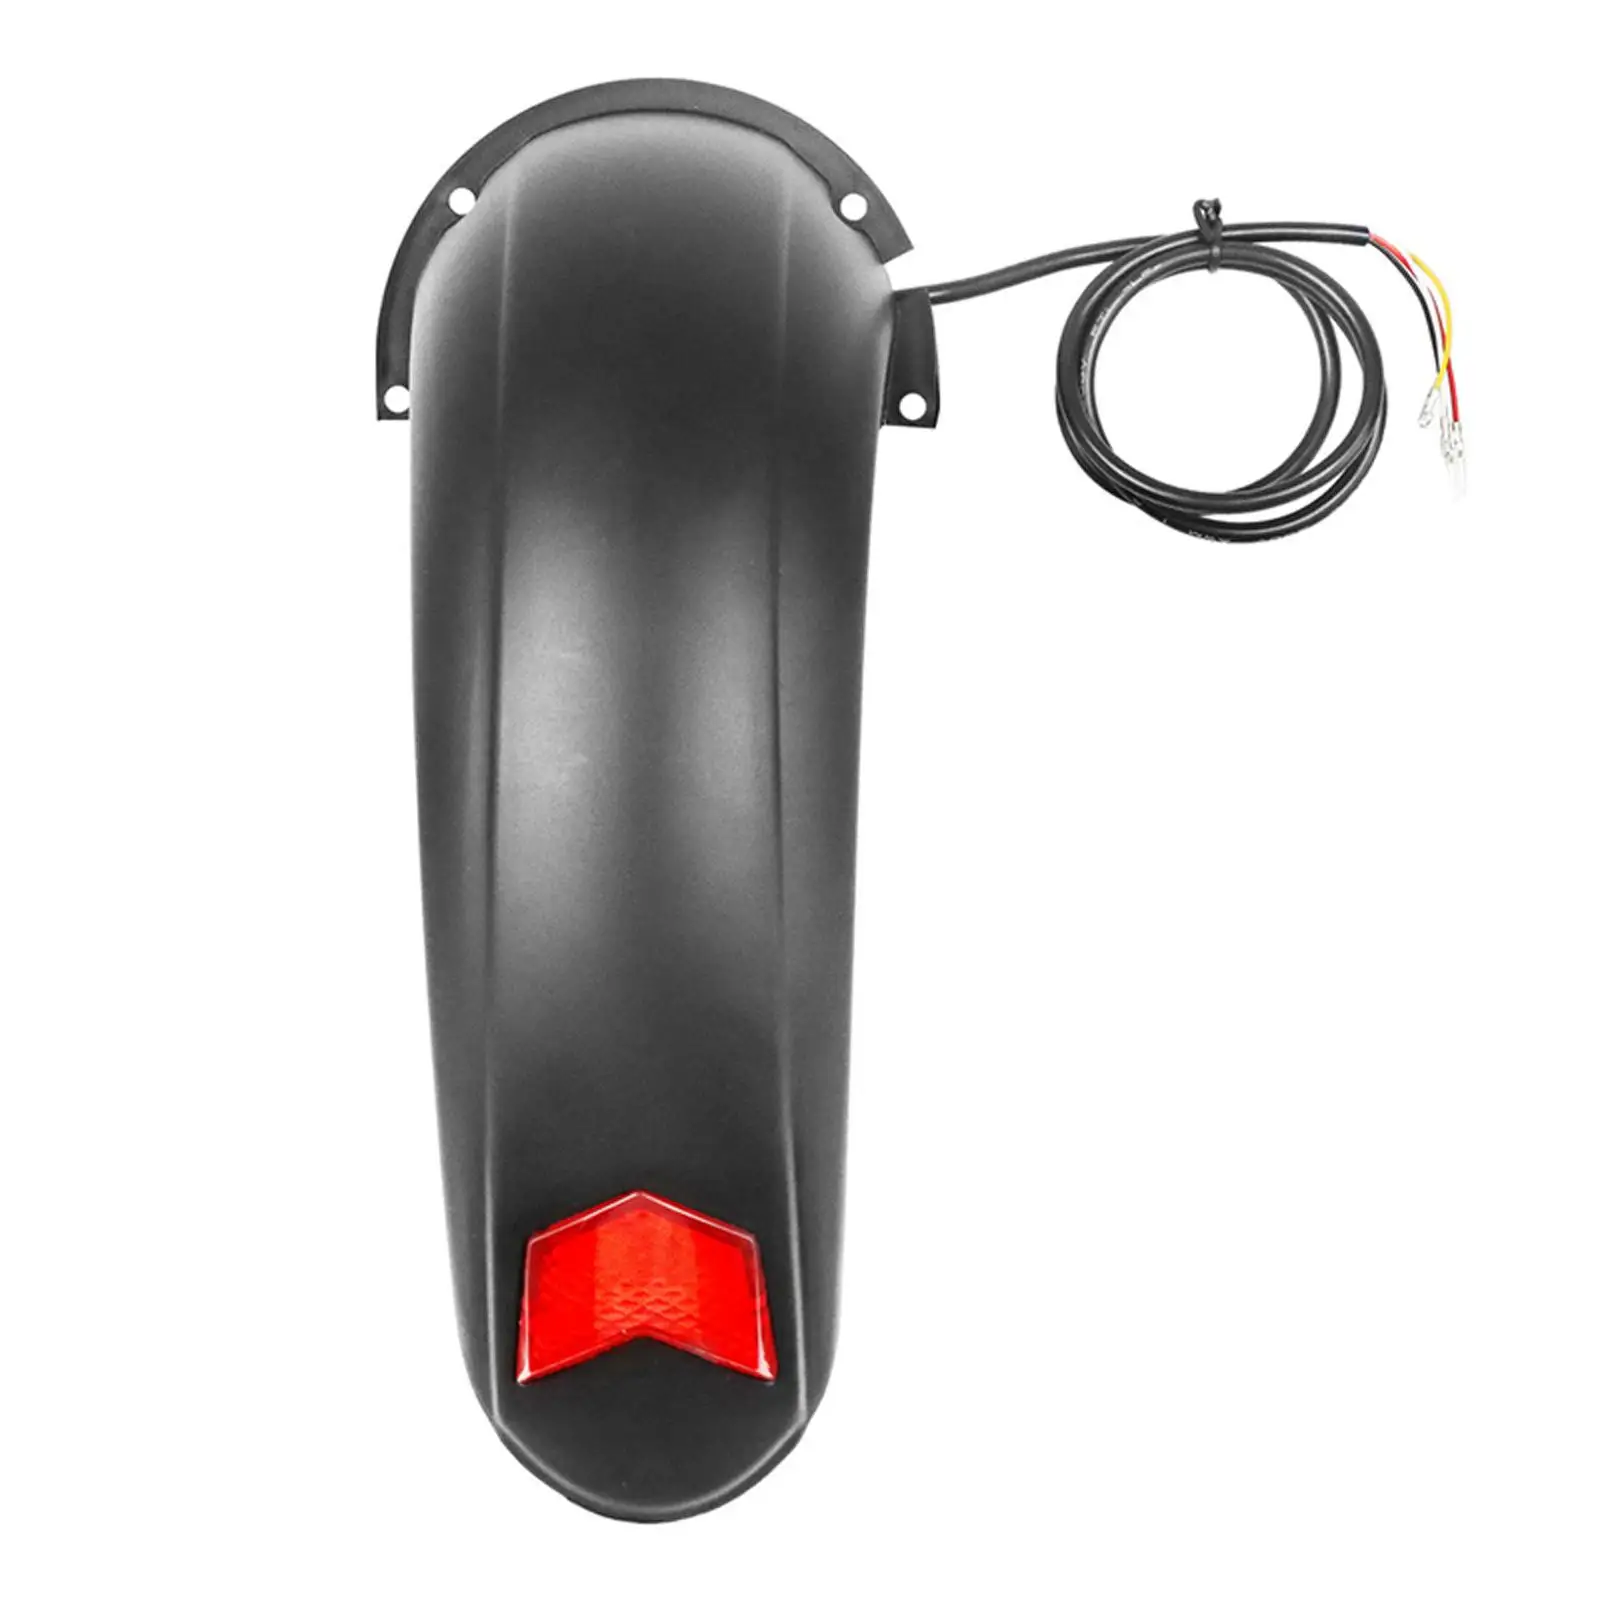 Tire Mudguard with Signal Tail Light Equipment Supplies Protector Replacement